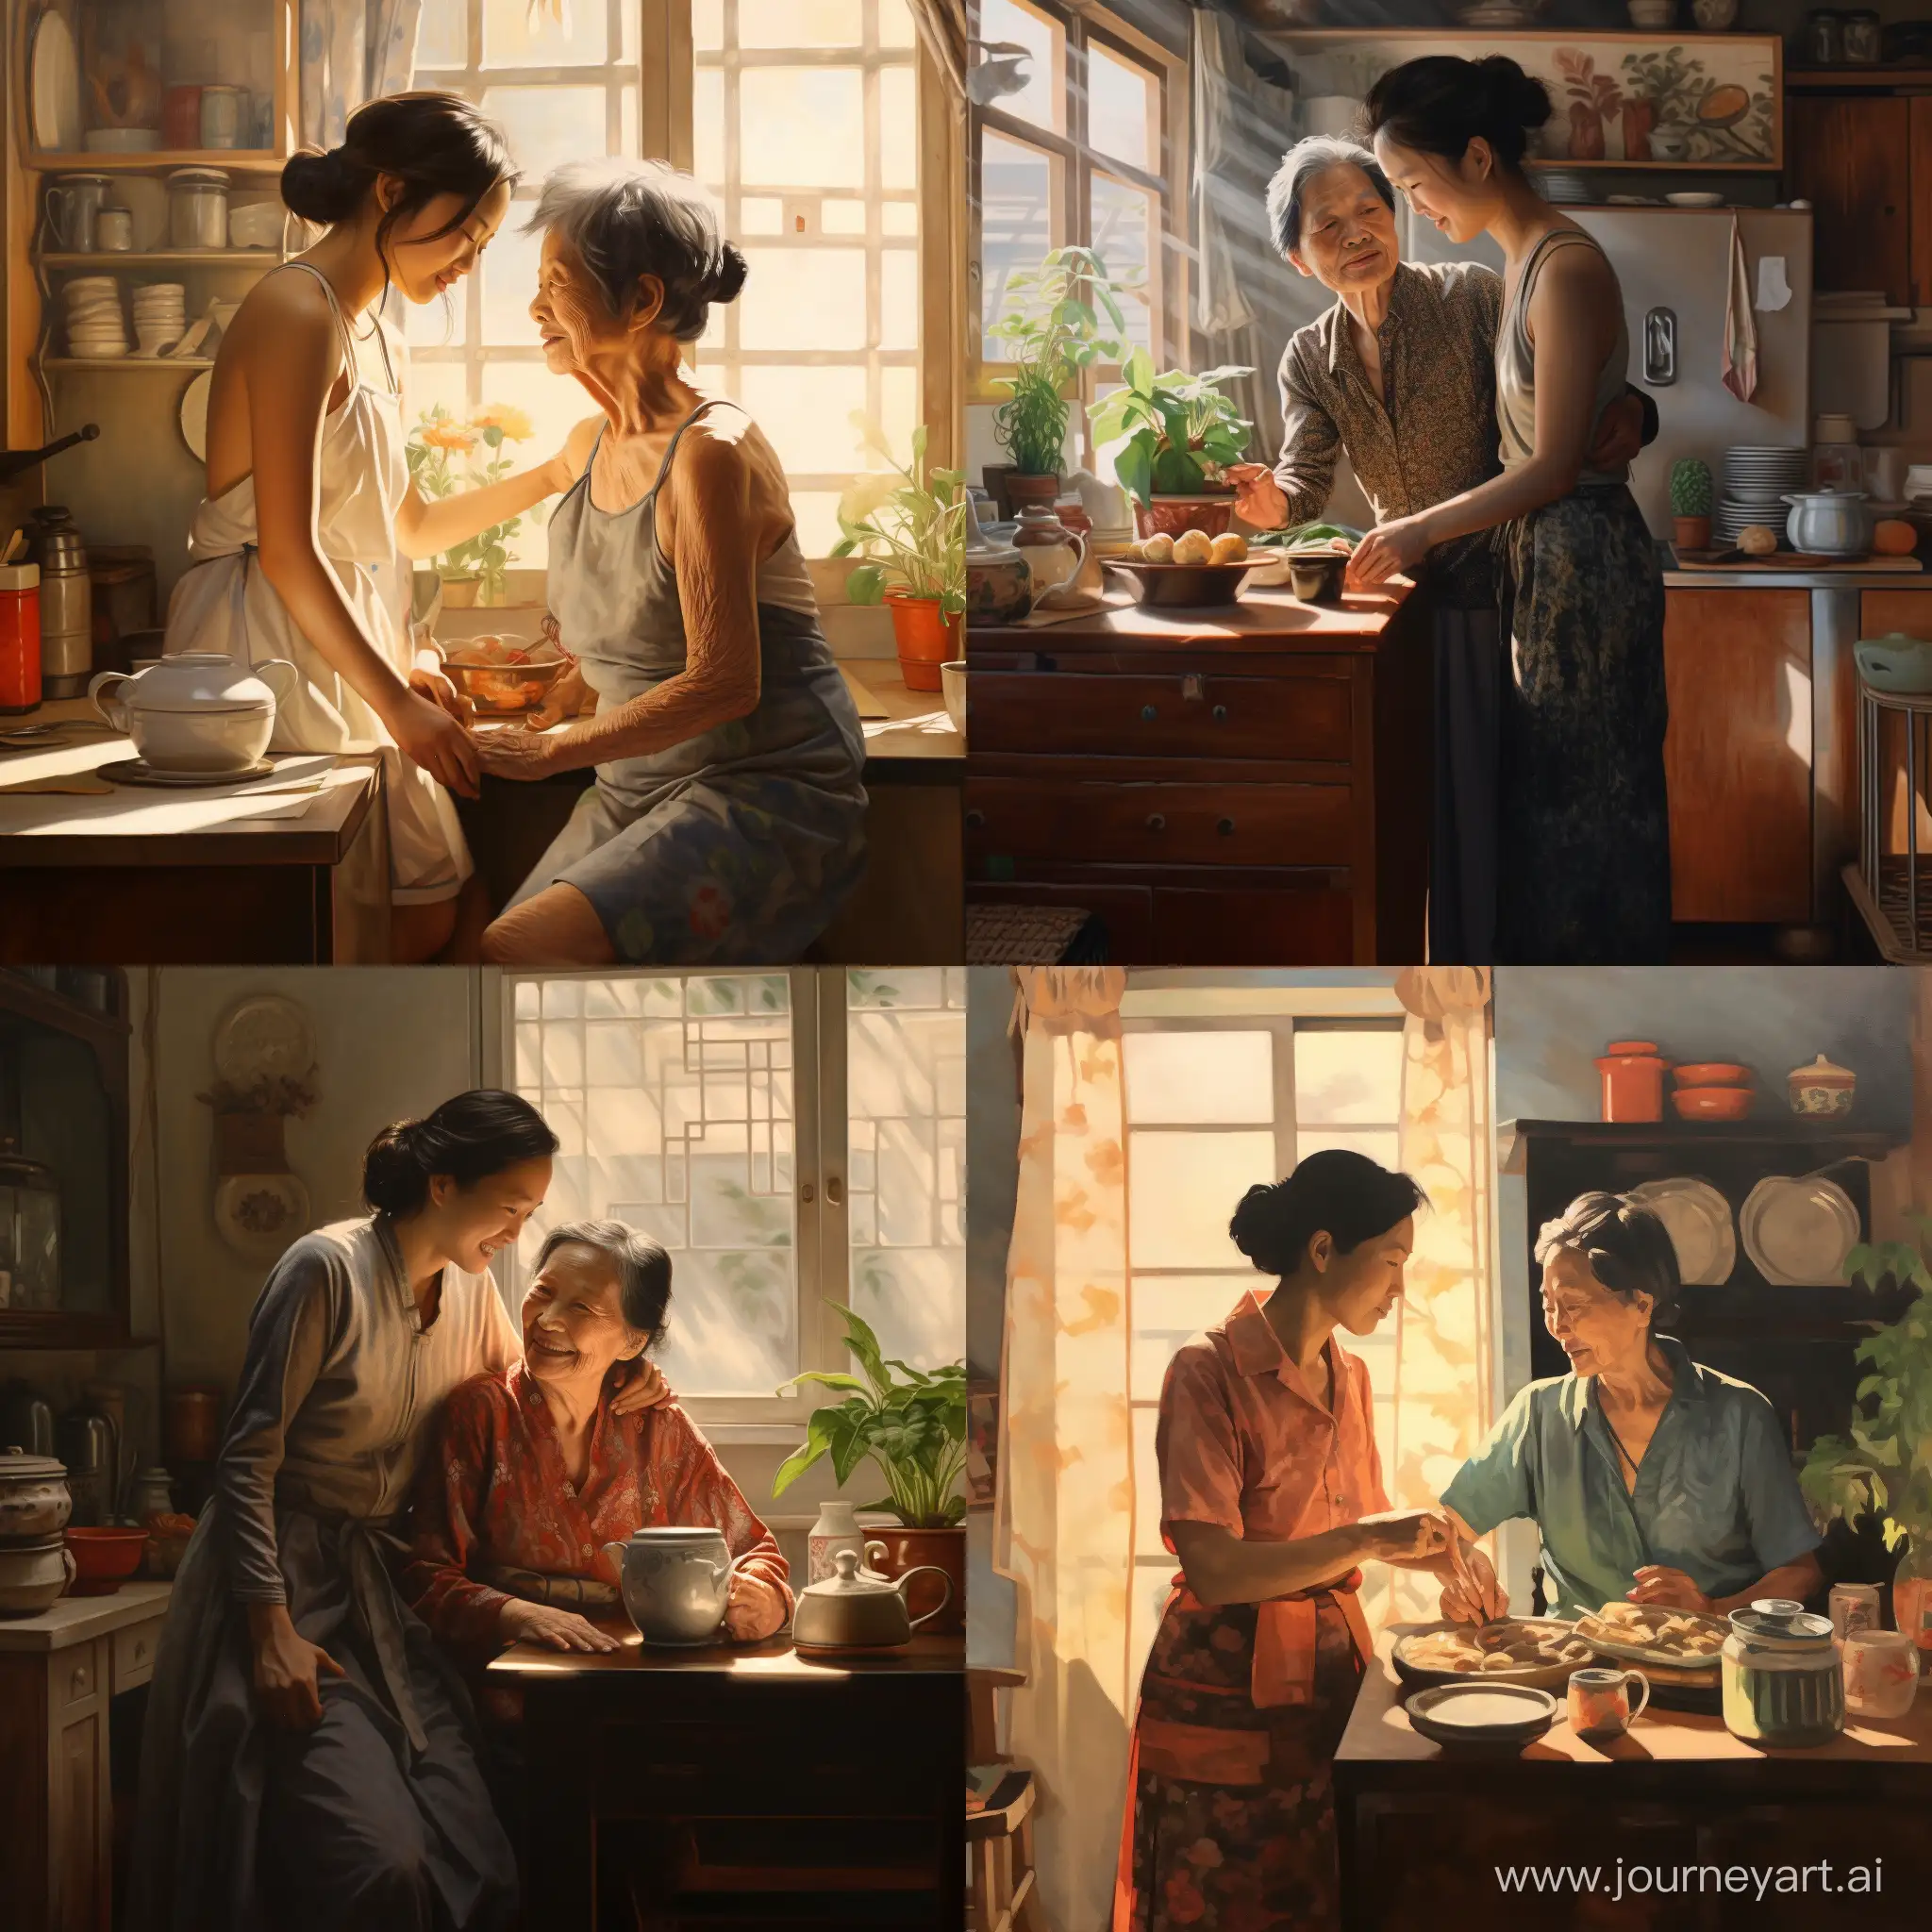 Under the early morning sun, an old Chinese lady and a Chinese daughter in her 40ties embraced each other in the warm and sunny kitchen